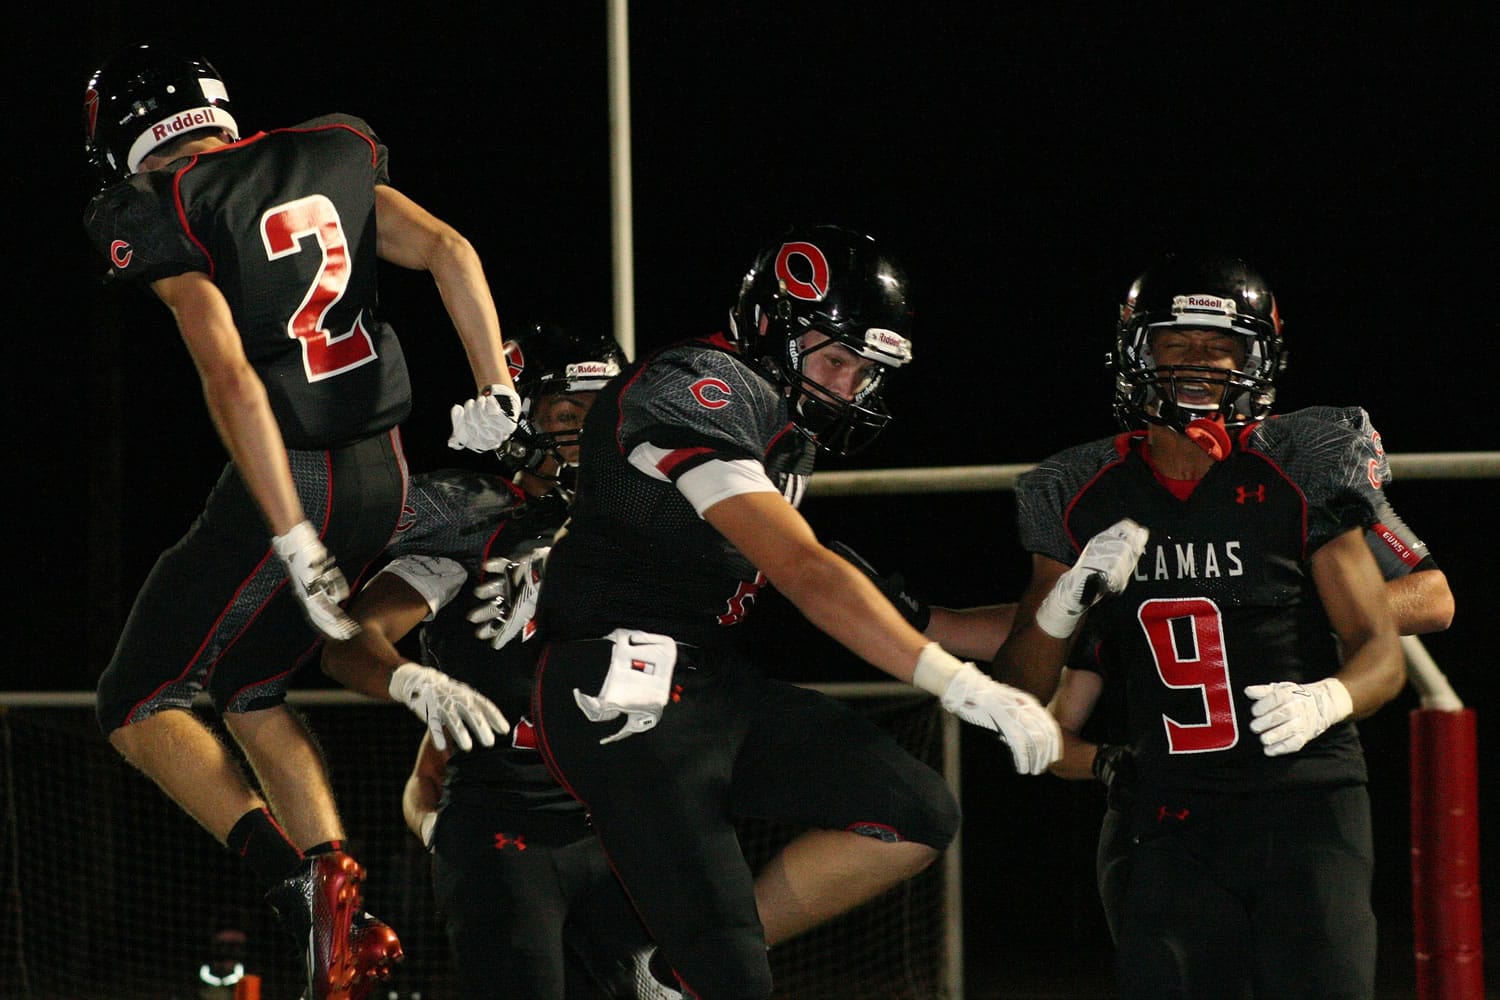 Dane Santos celebrates with his teammates after returning an interception for a 45-yard touchdown.